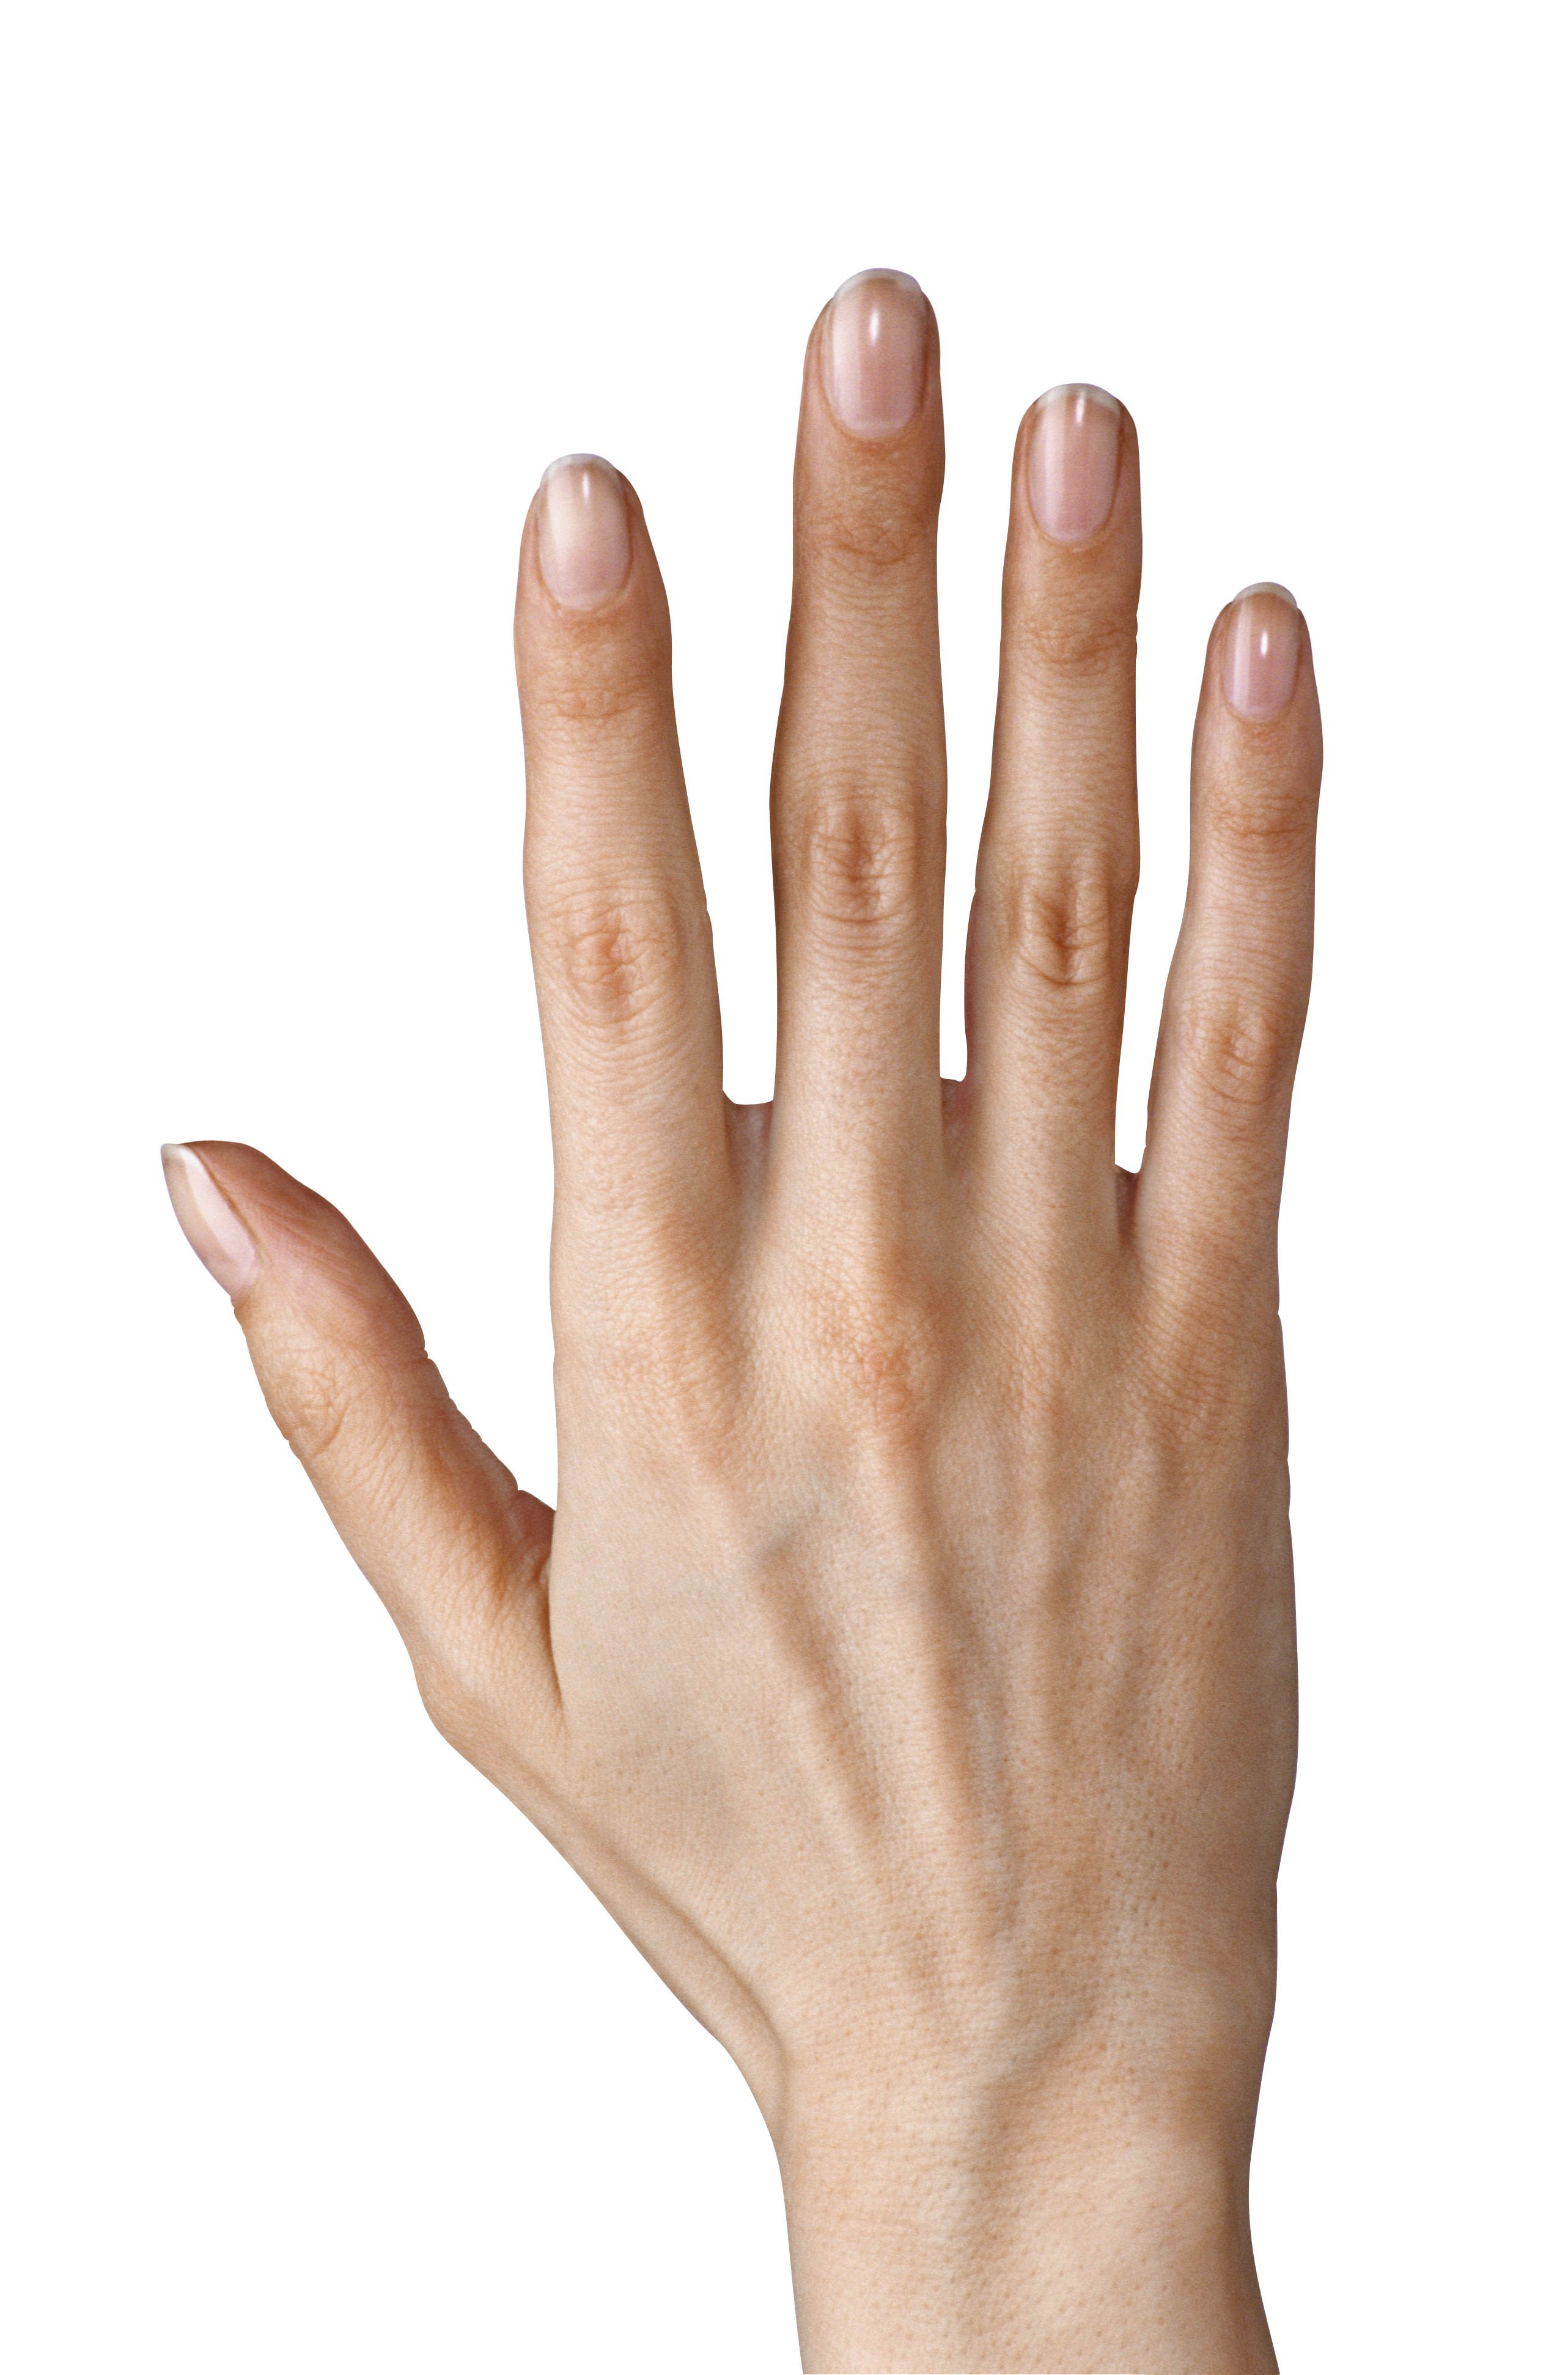 Hand Showing Five Fingers PNG Clipart Image.